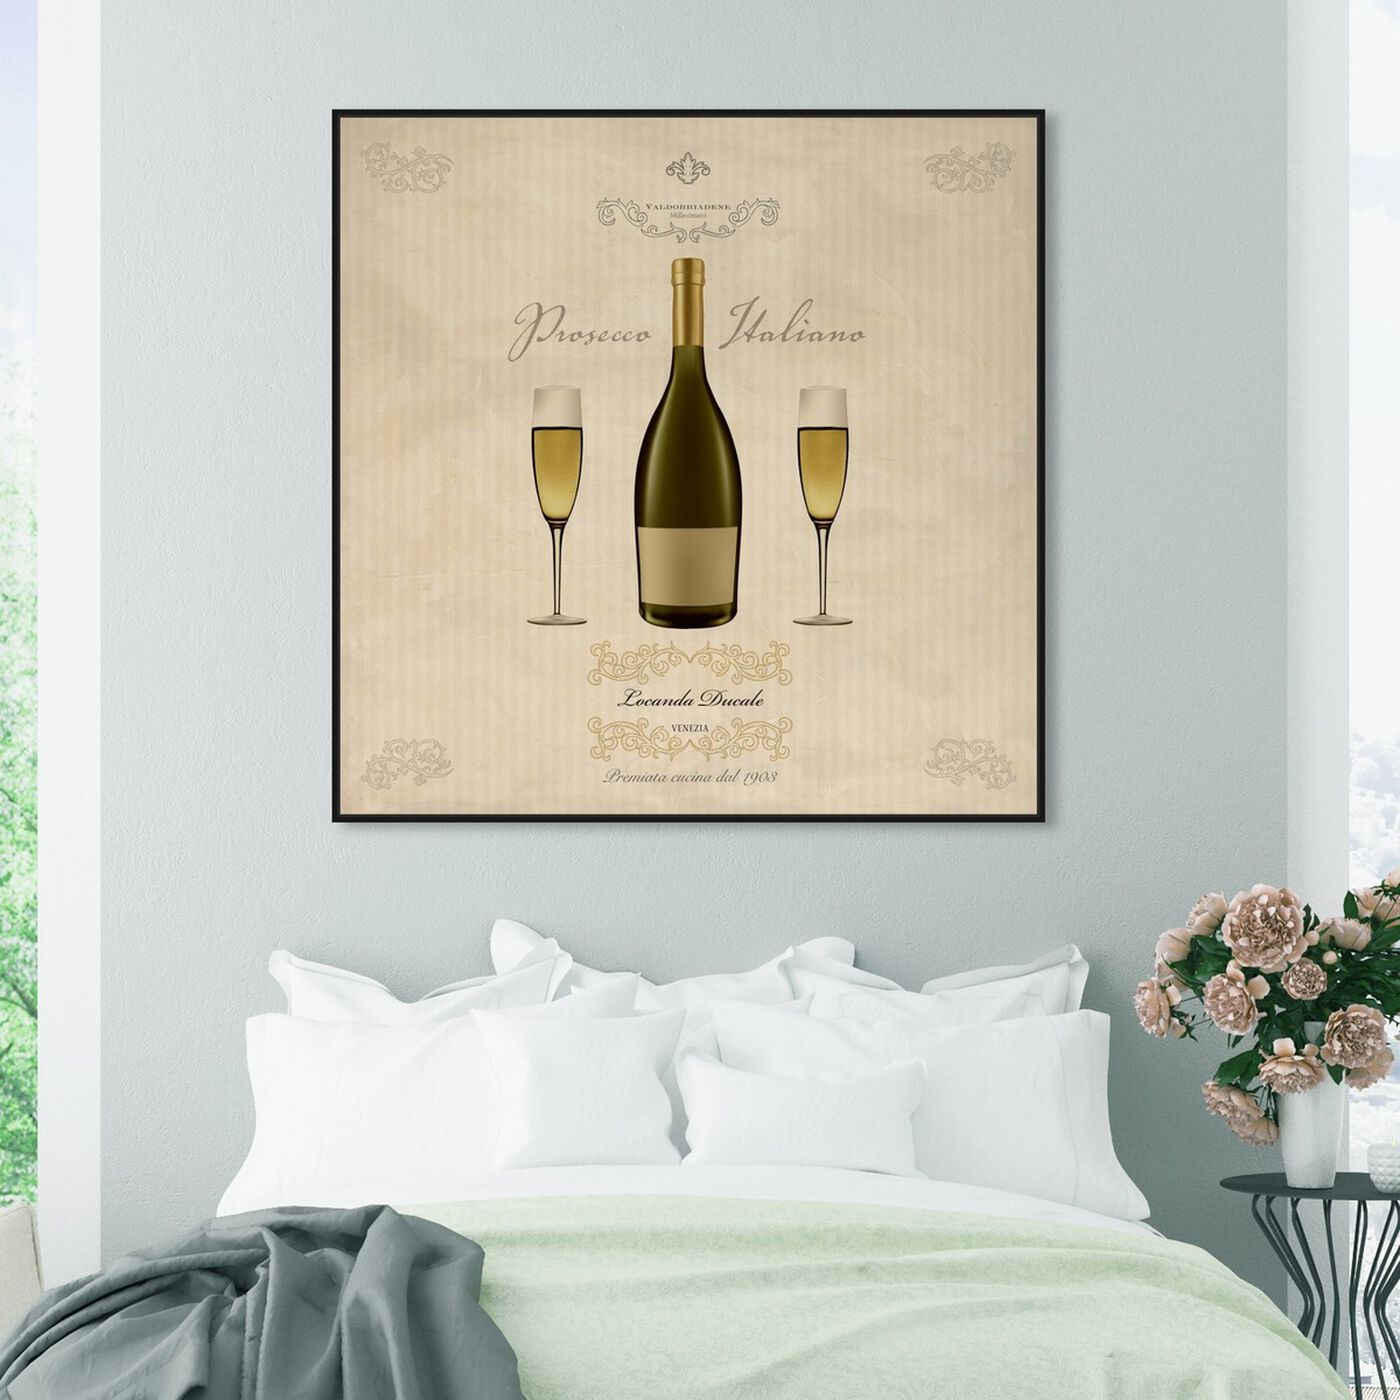 Hanging view of Sai - Prosecco Italiano 1SF1383 featuring drinks and spirits and wine art.